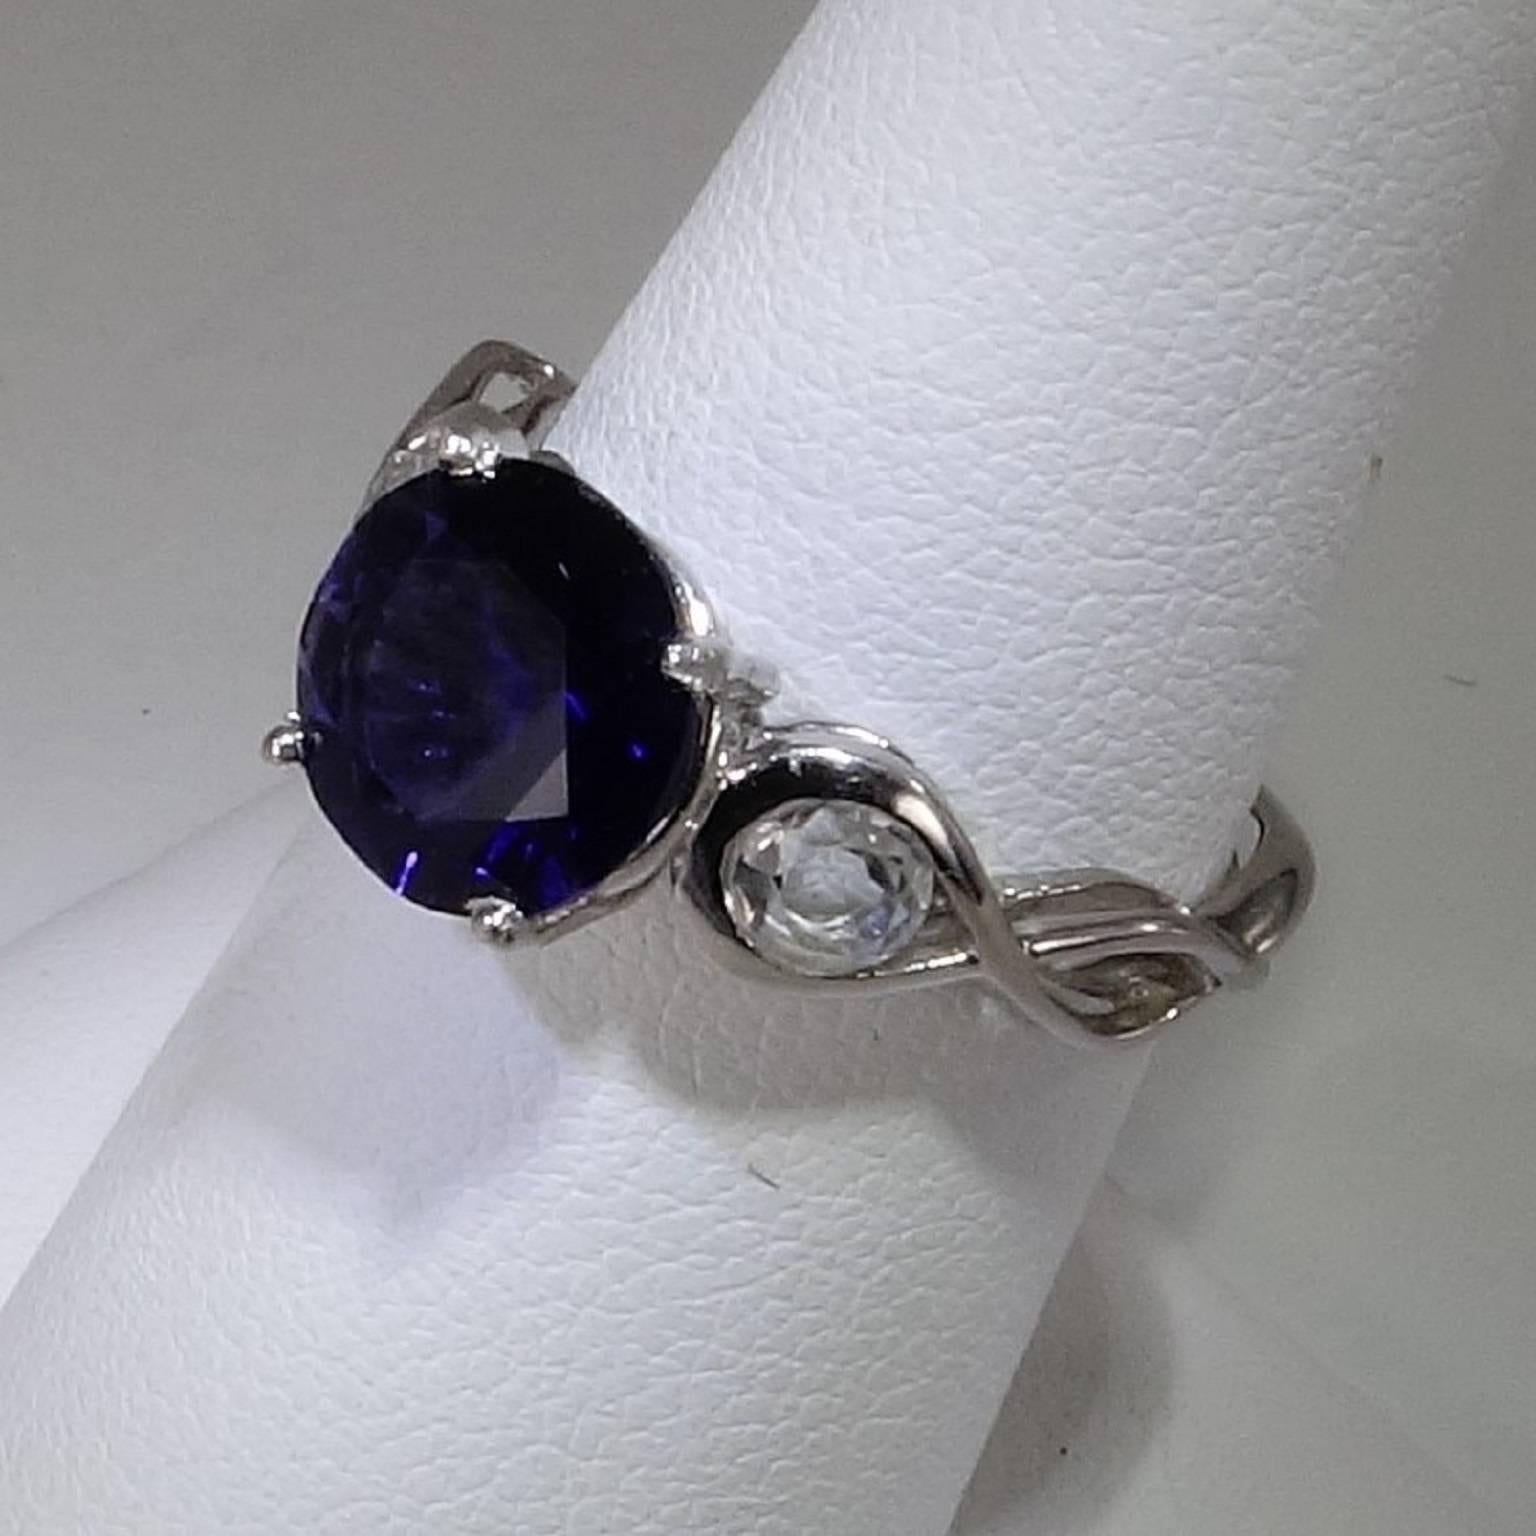 Blue Iolite and Silver Topaz Sterling Silver Ring 1